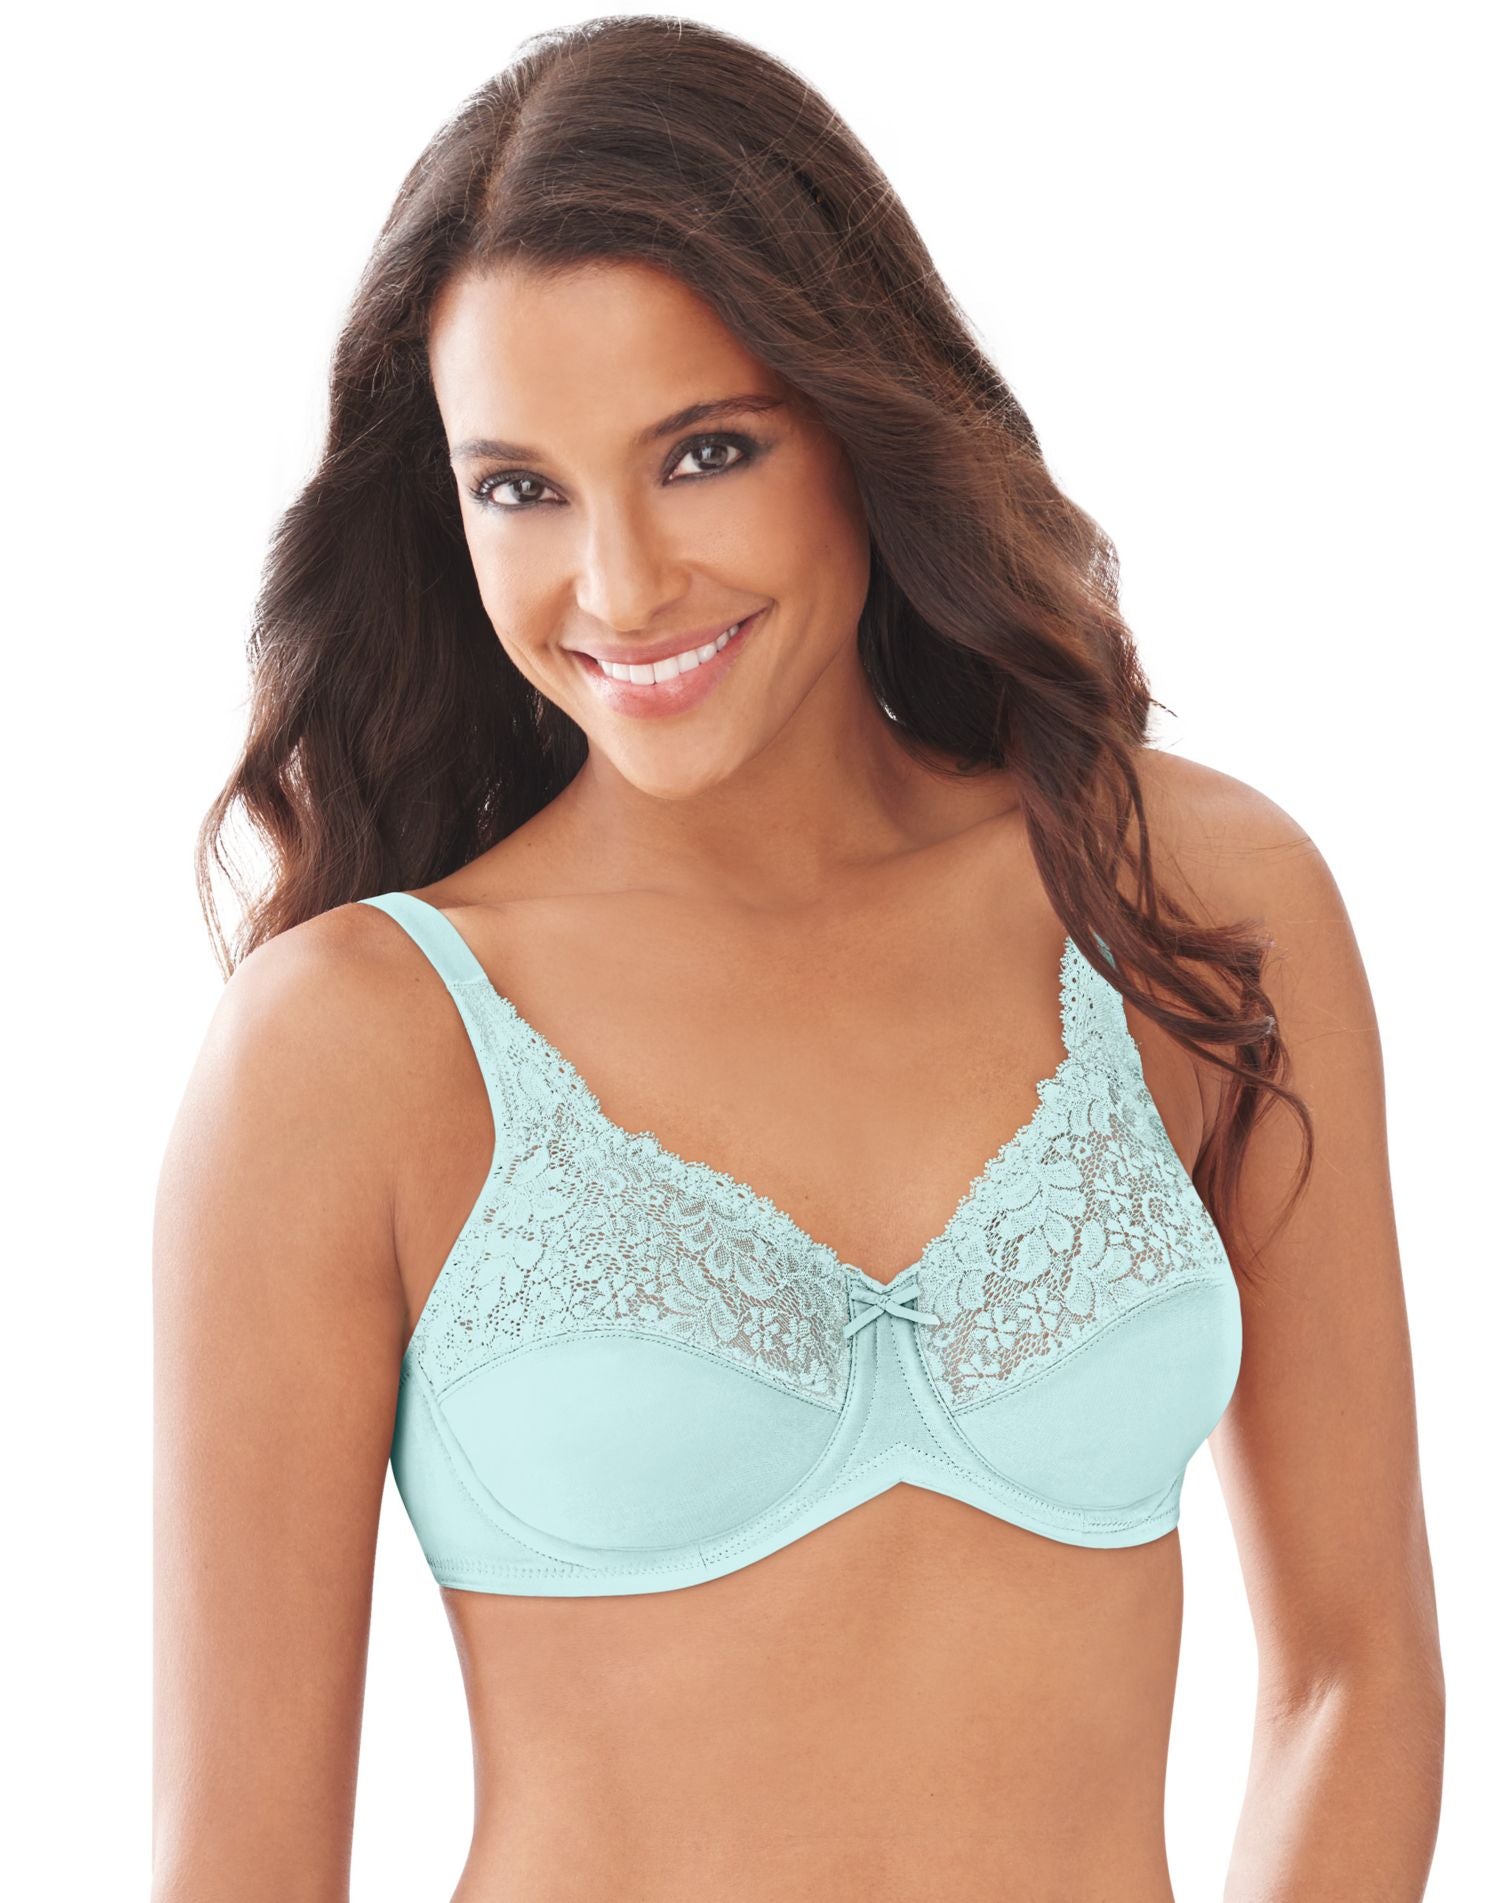 Bali Playtex Lilyette Bras BRAND NEW WITH TAGS! - US IMPORTS